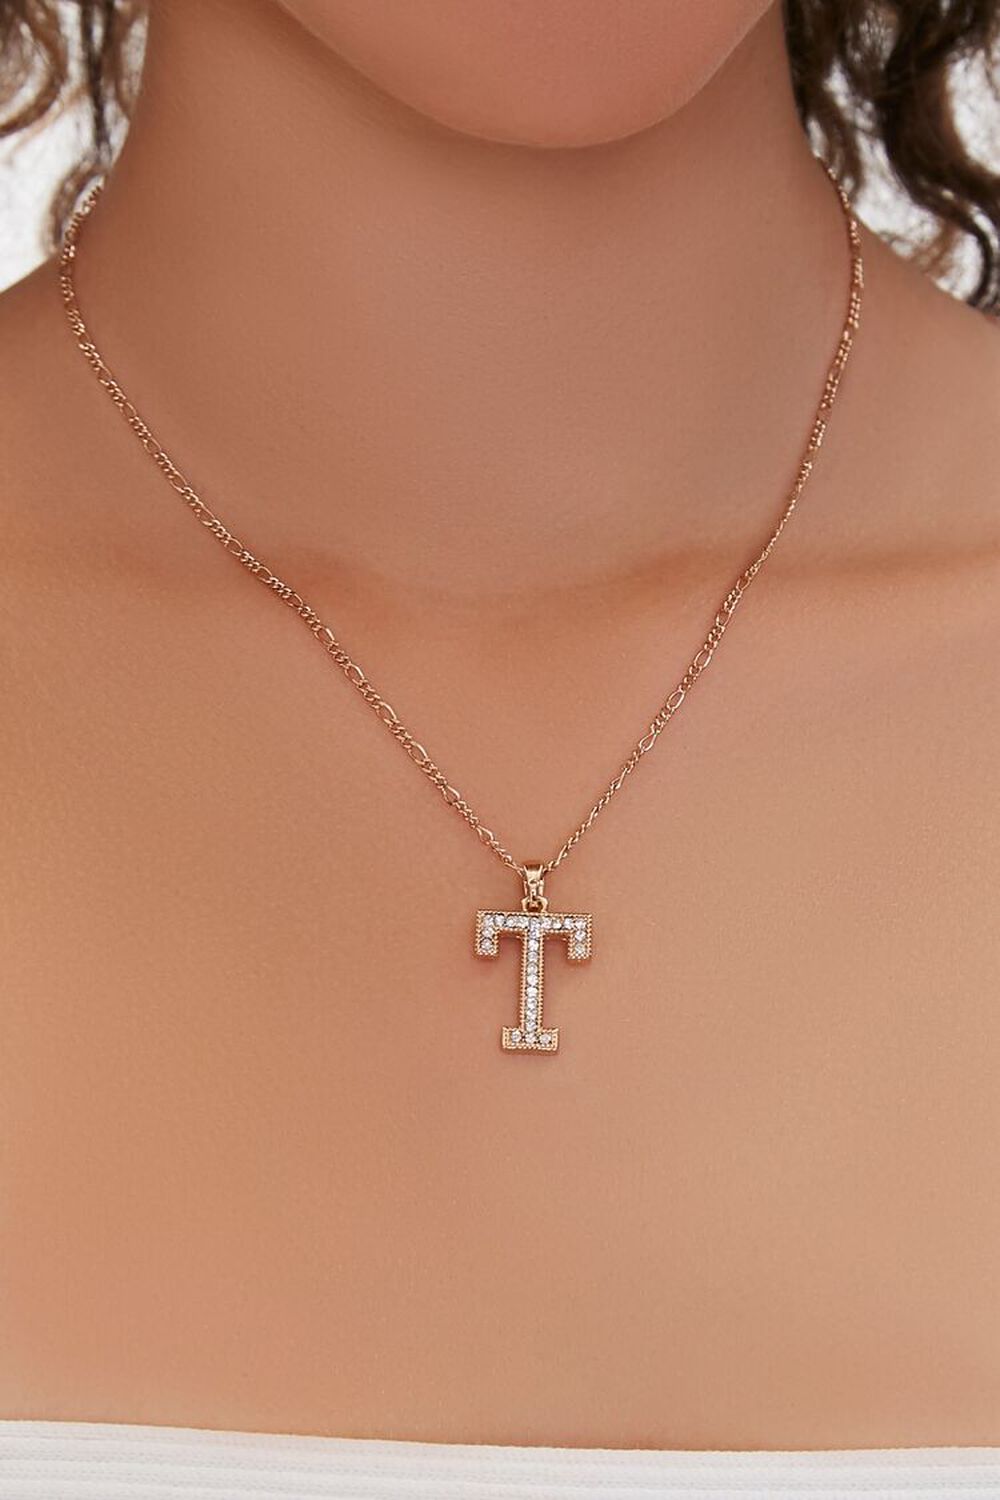 GOLD/T Initial Pendant Necklace, image 1